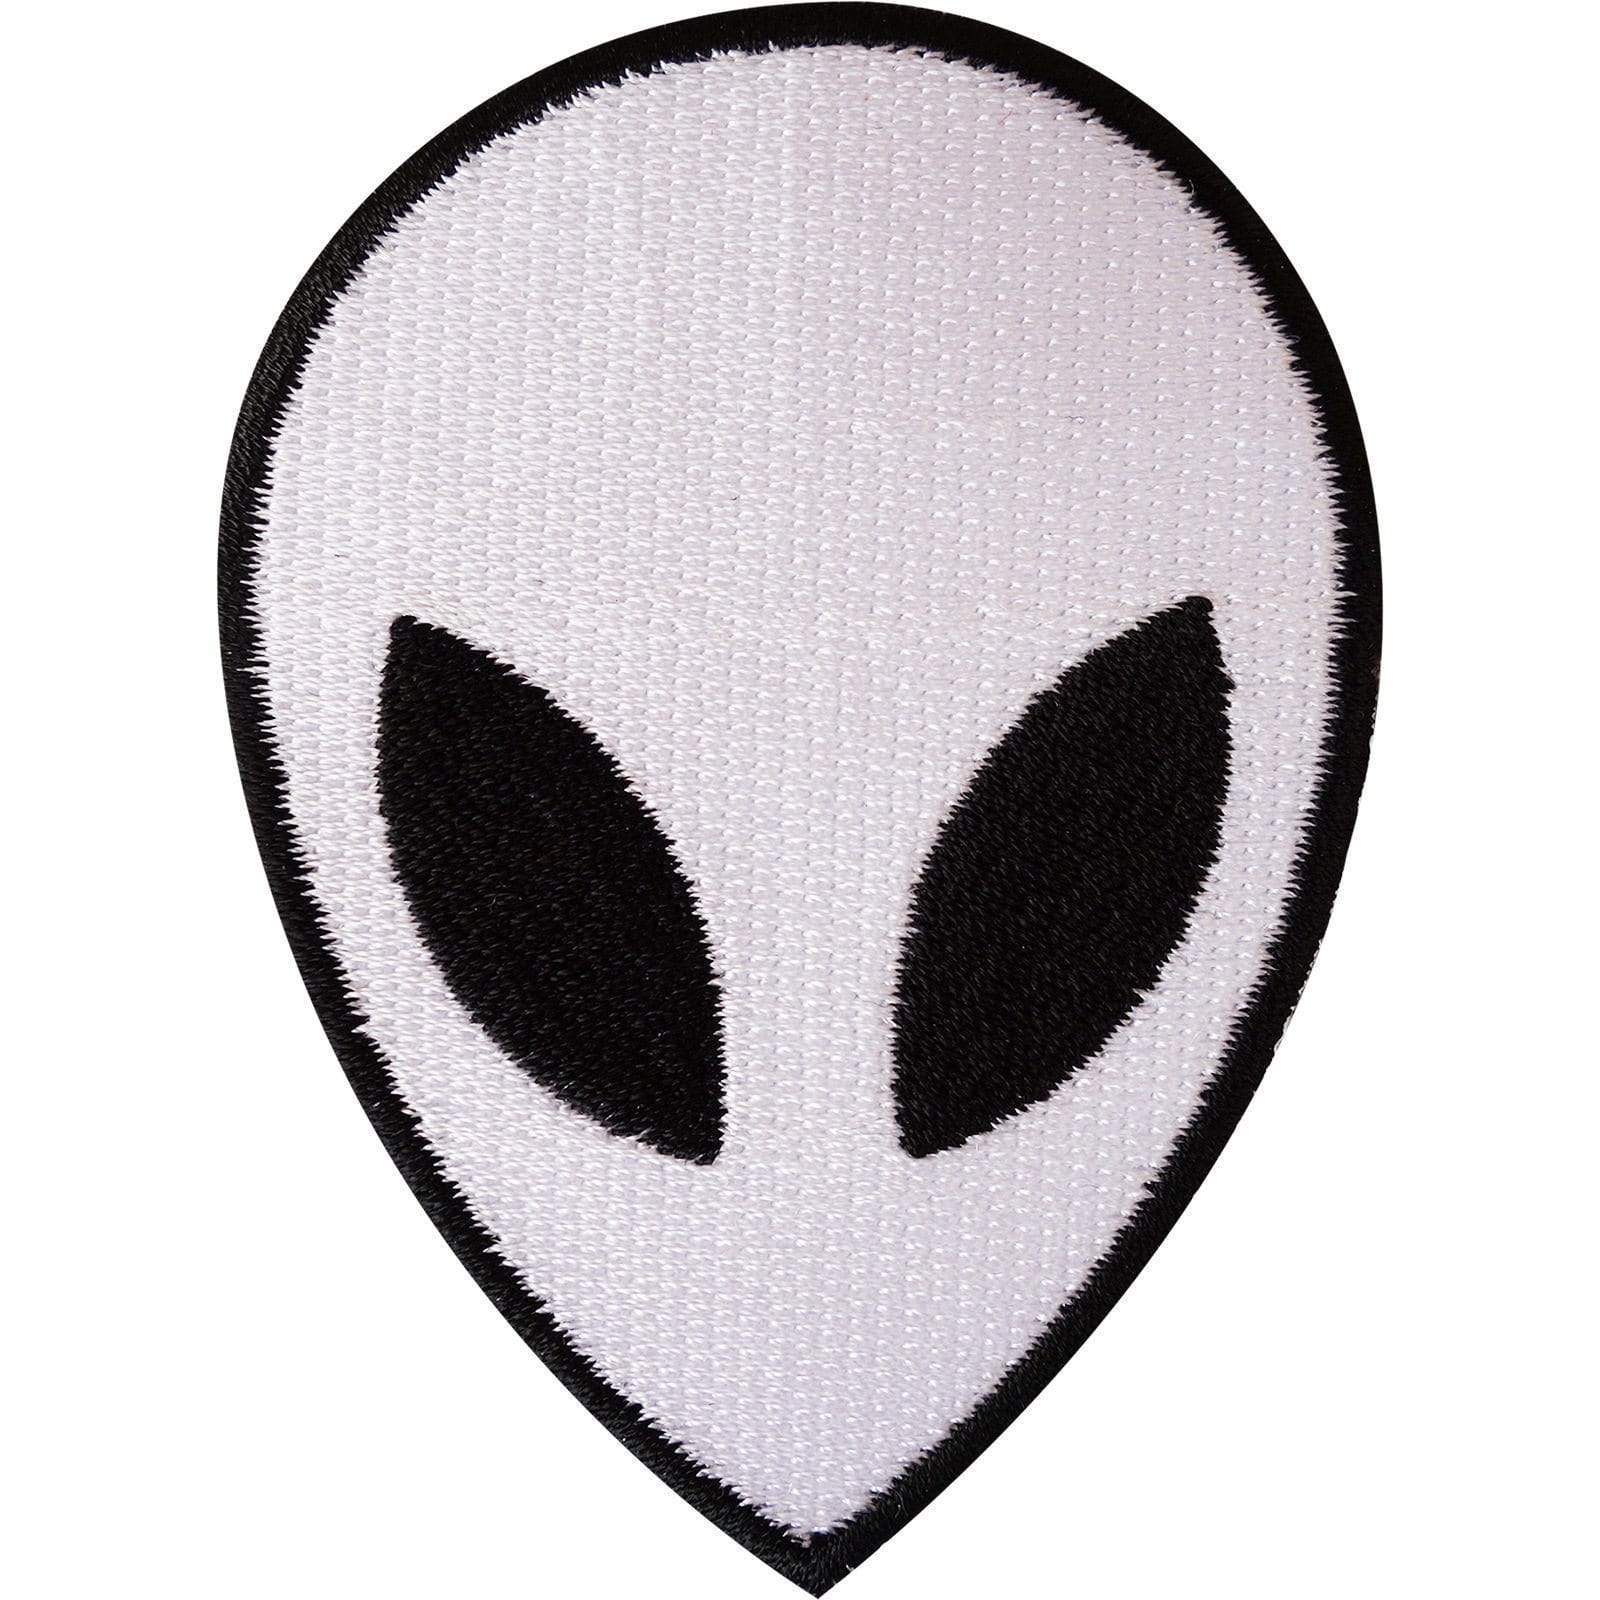 Alien Iron On Patch / Sew On Clothes Bag Jacket NASA Space UFO Embroidery Badge